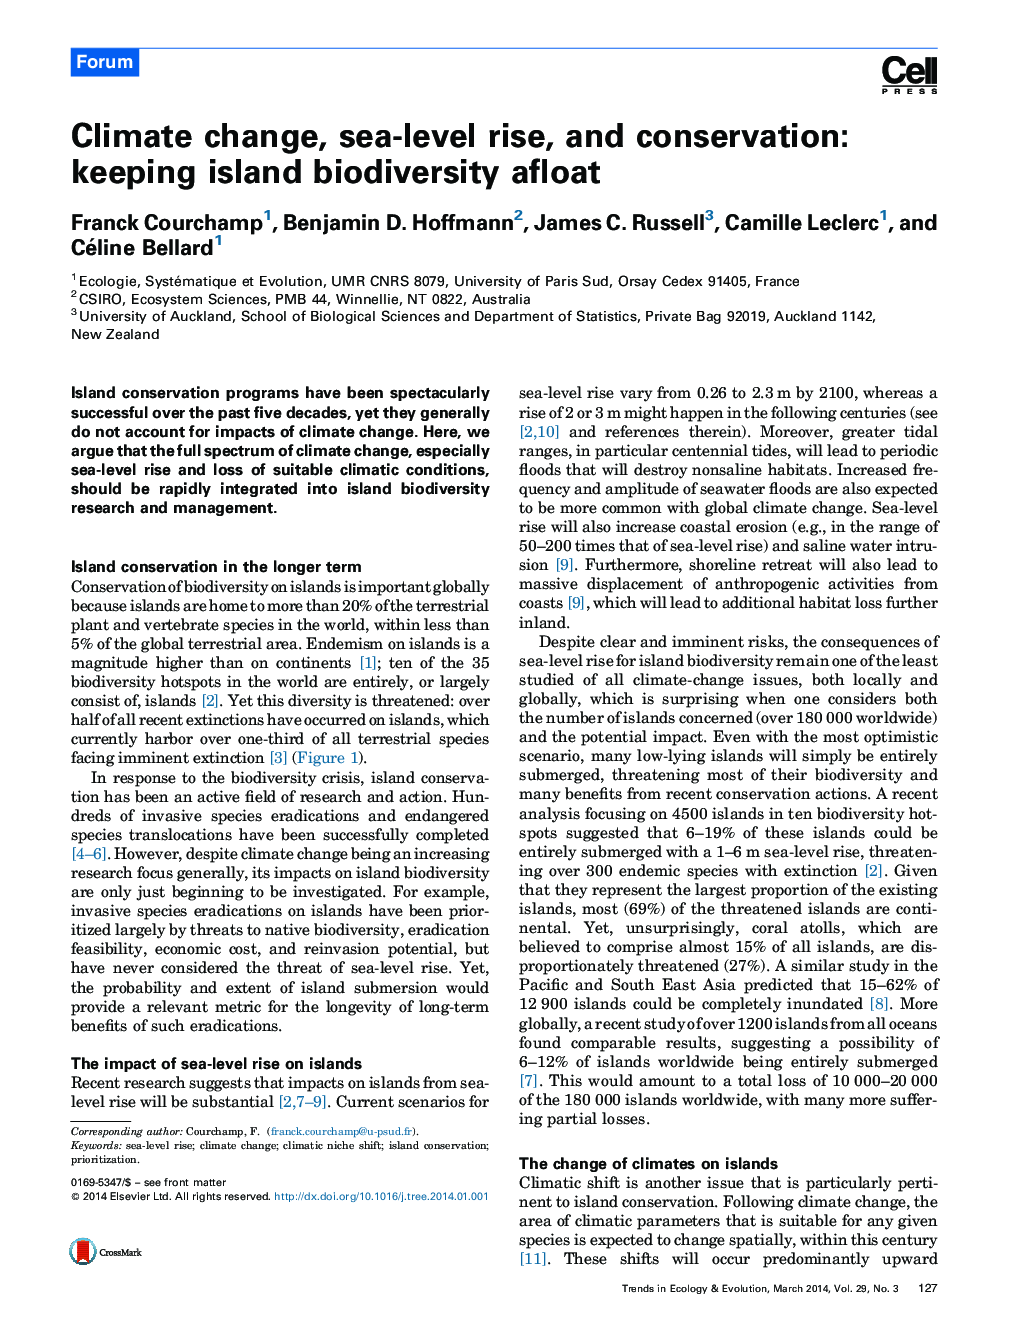 Climate change, sea-level rise, and conservation: keeping island biodiversity afloat